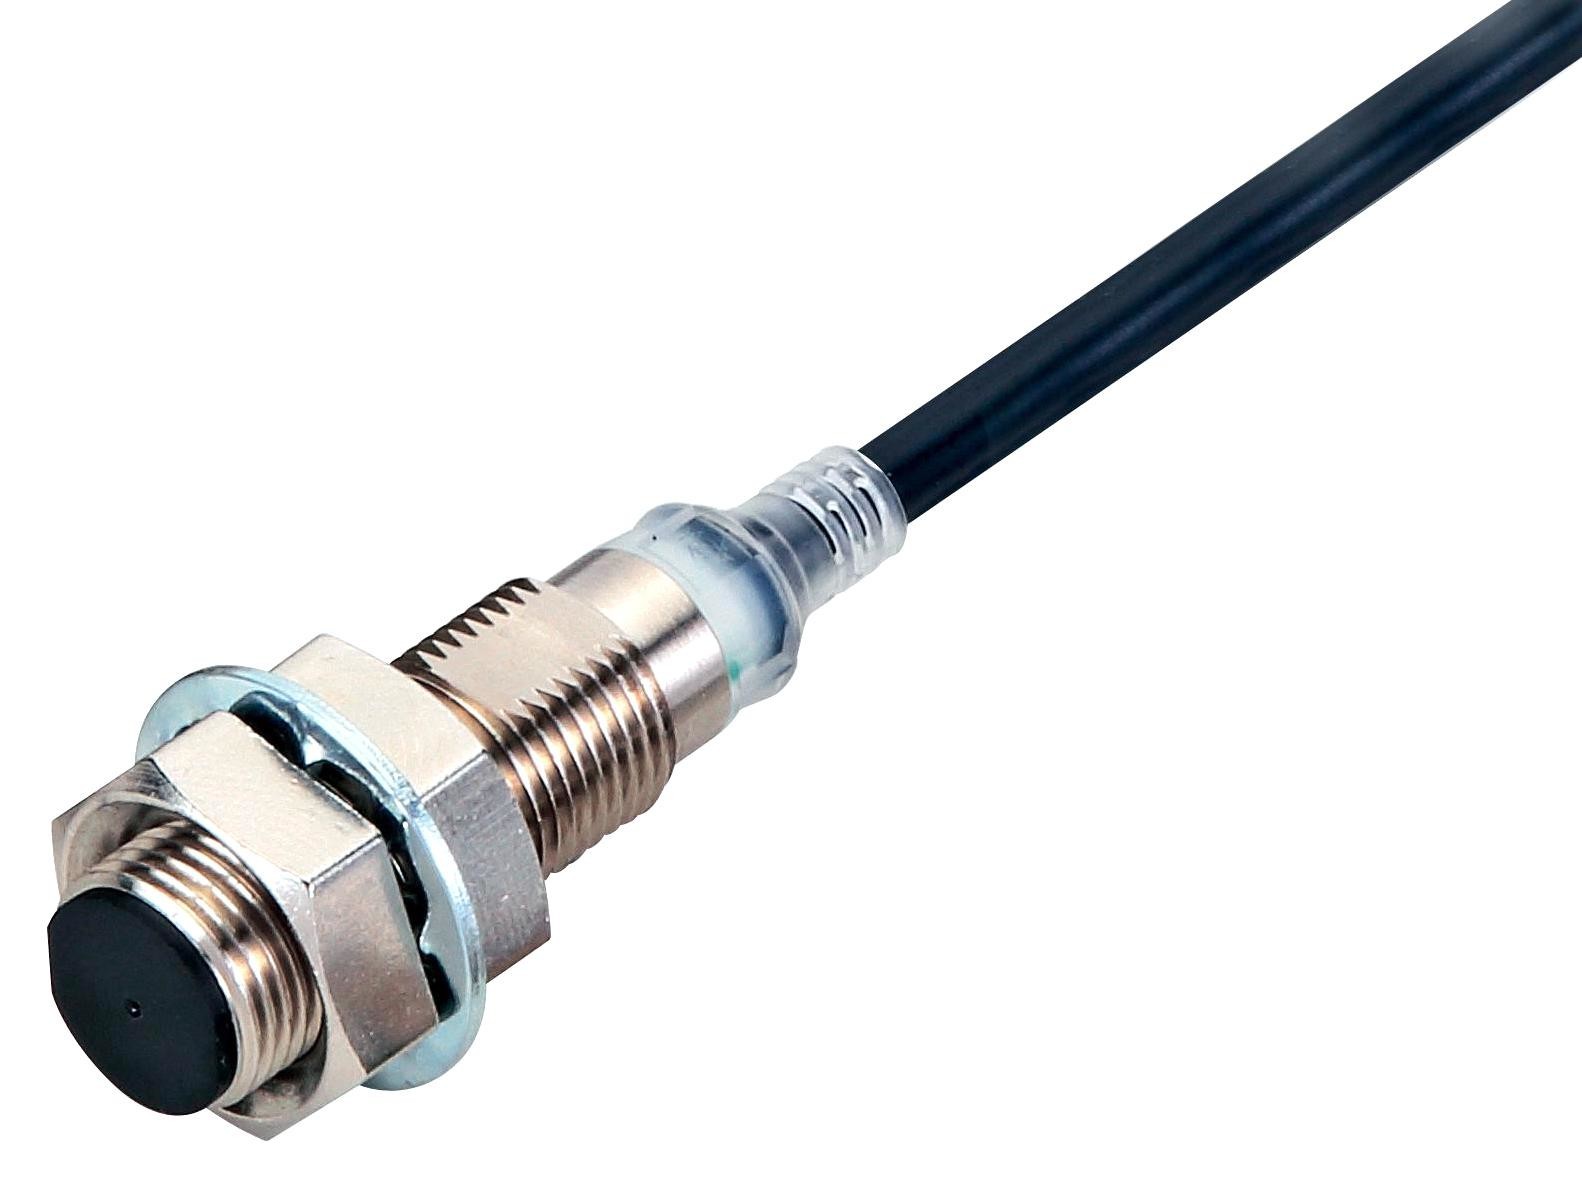 Omron Industrial Automation E2E2-X5My1M4 Inductive Prox Sensor, 5mm, 1No, 240Vac